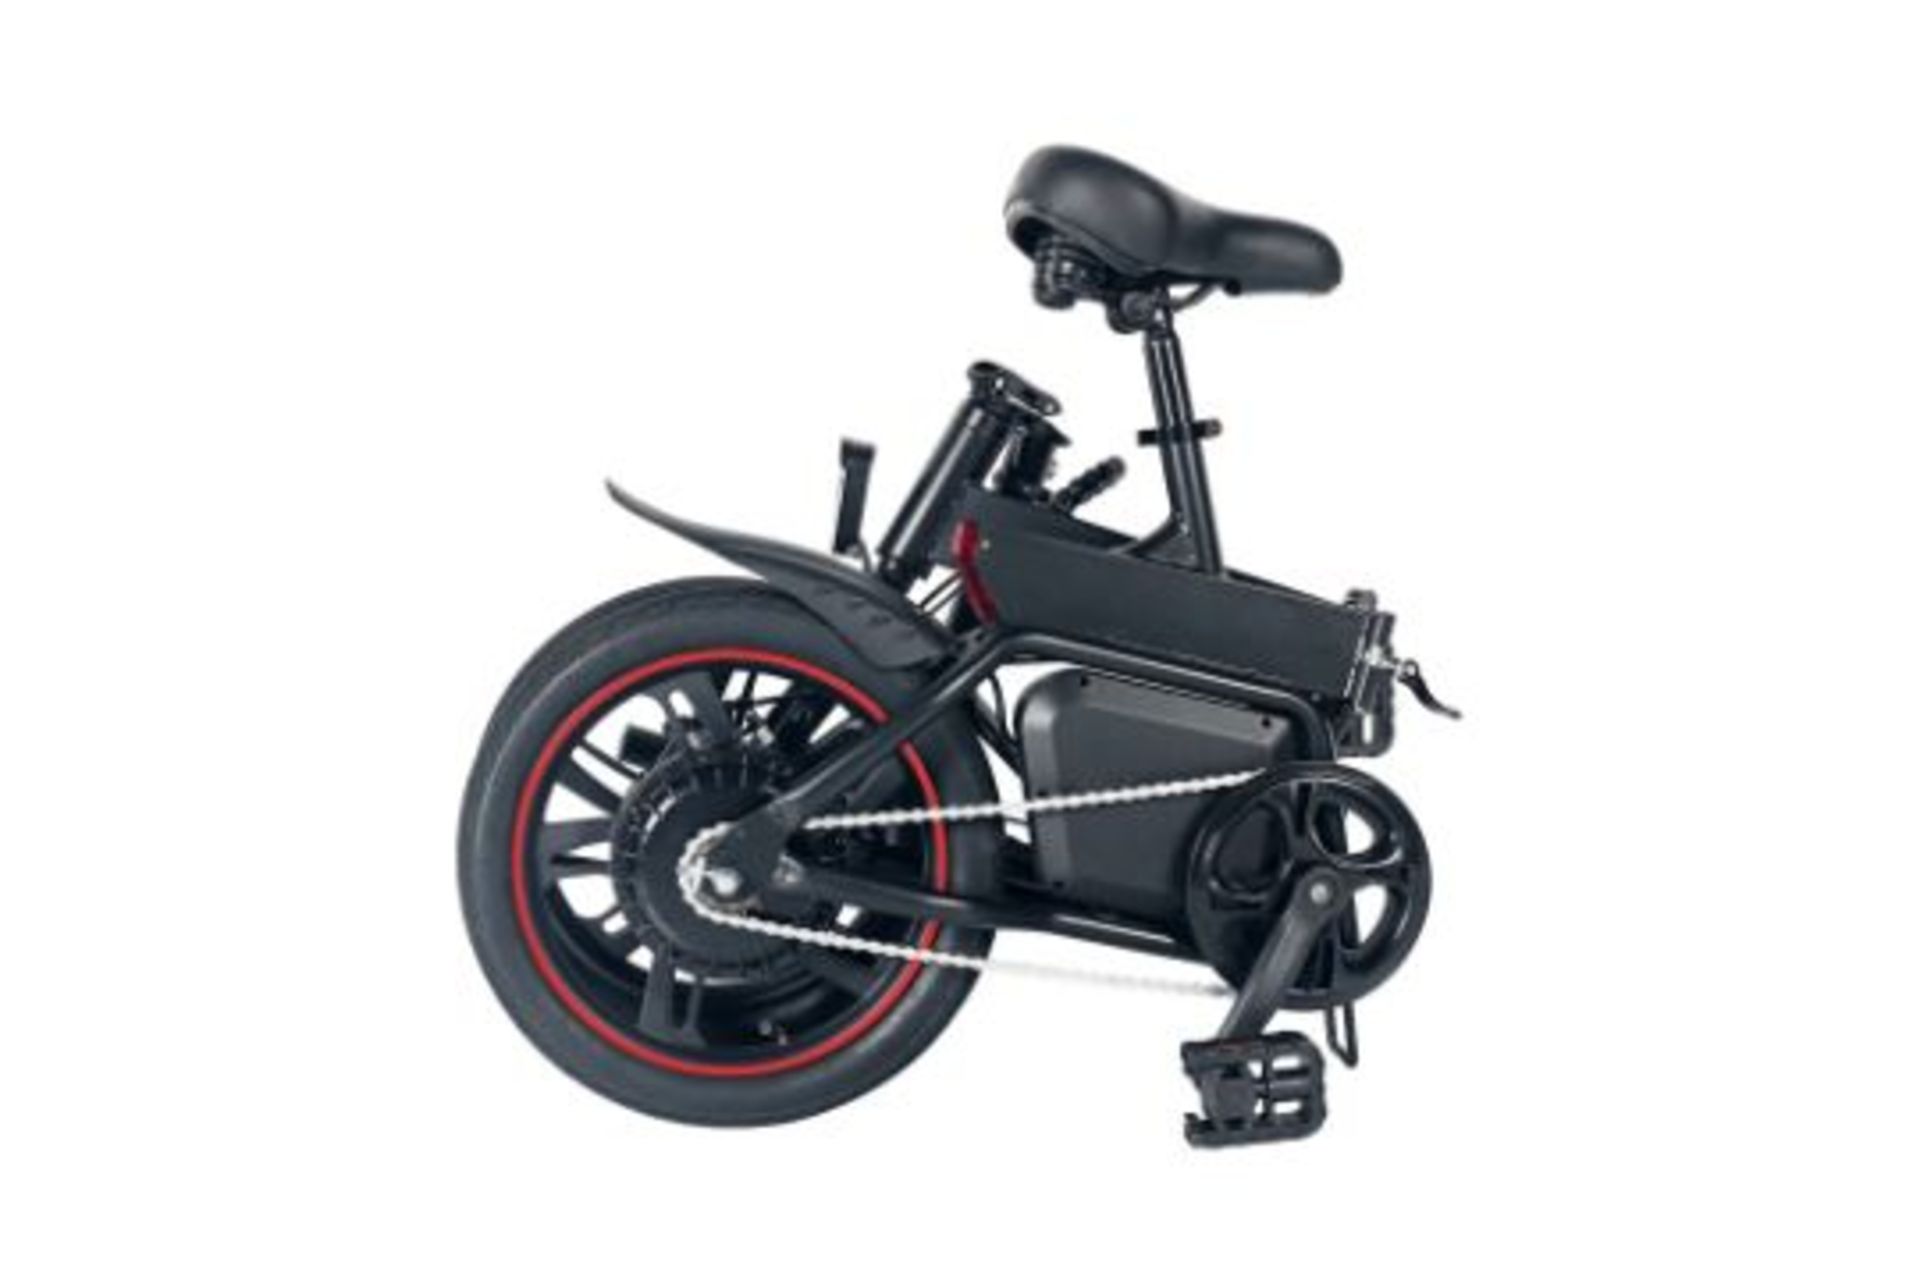 5 X BRAND NEW Windgoo B20 Pro Electric Bike. RRP £1,100.99. With 16-inch-wide tires and a frame of - Bild 2 aus 2